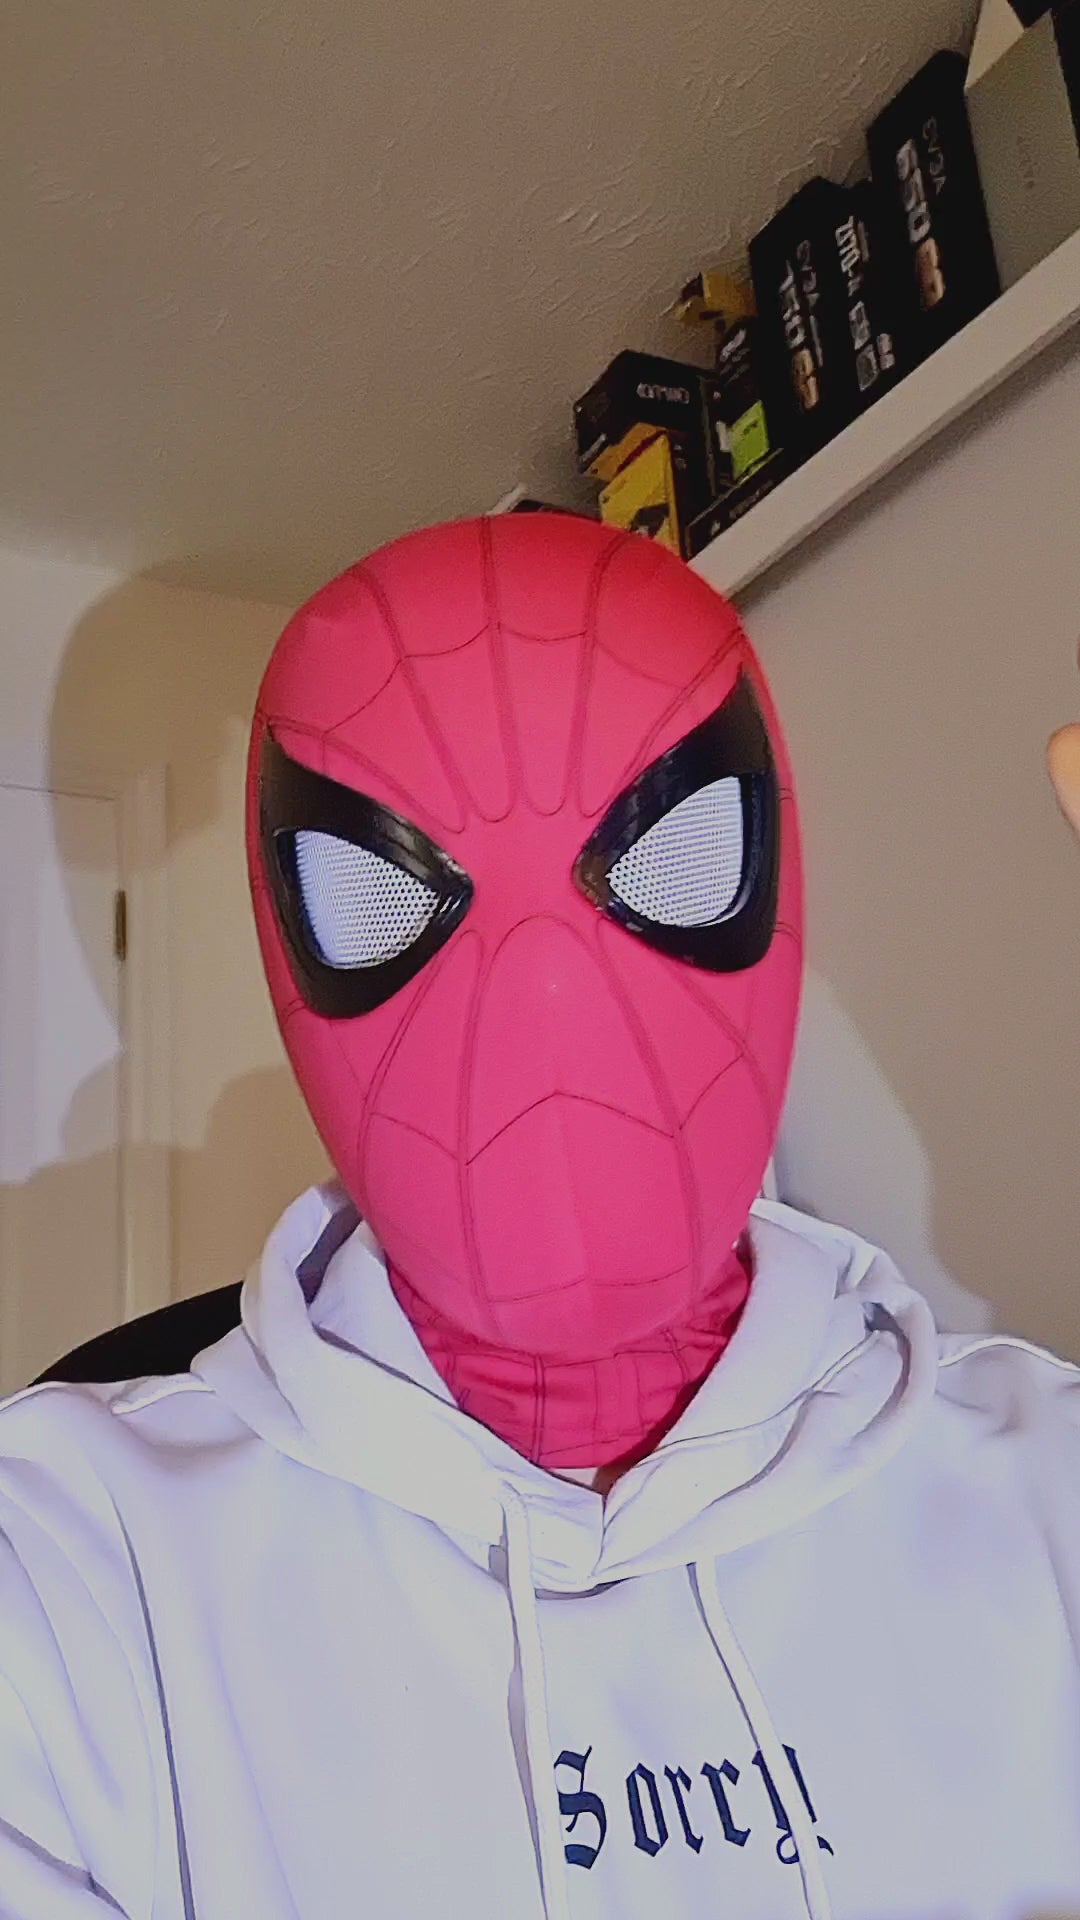 Spiderman mask with movable eyes blinking, remote control being used. Spiderman mask remote control version testing video.